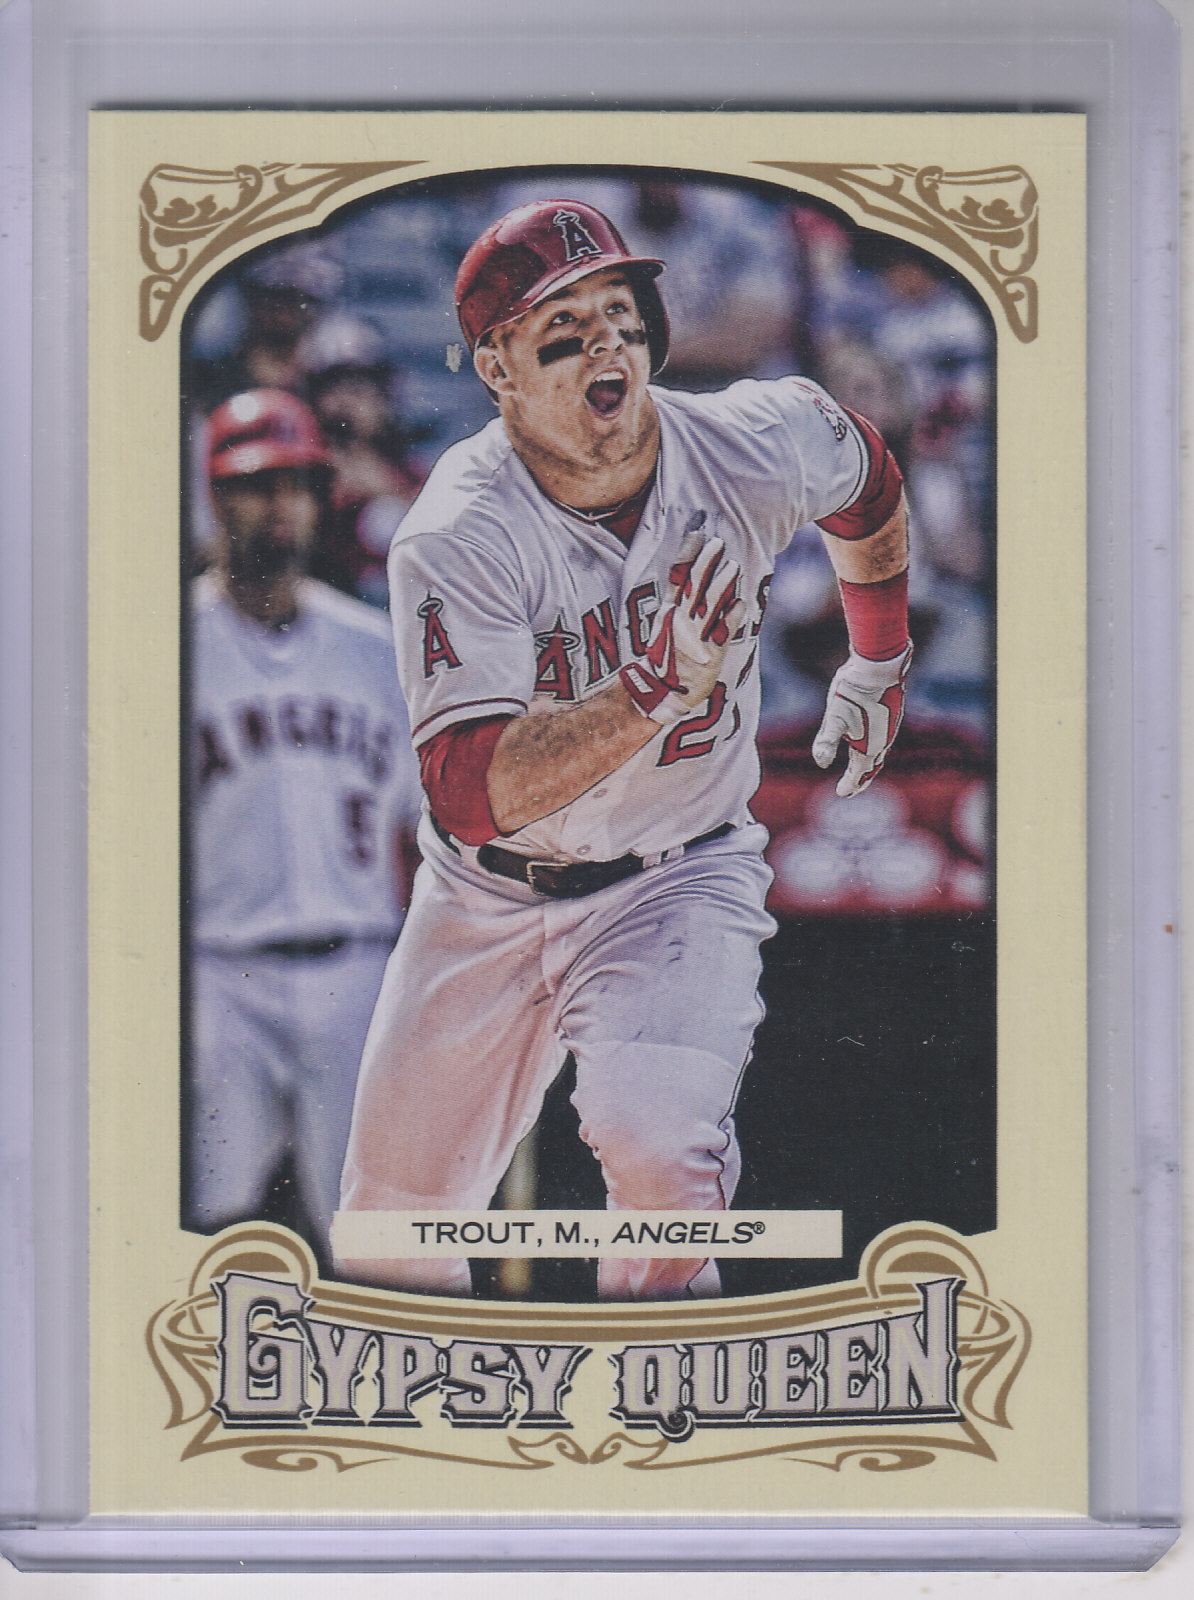 2014 Topps Gypsy Queen #349A Mike Trout SP